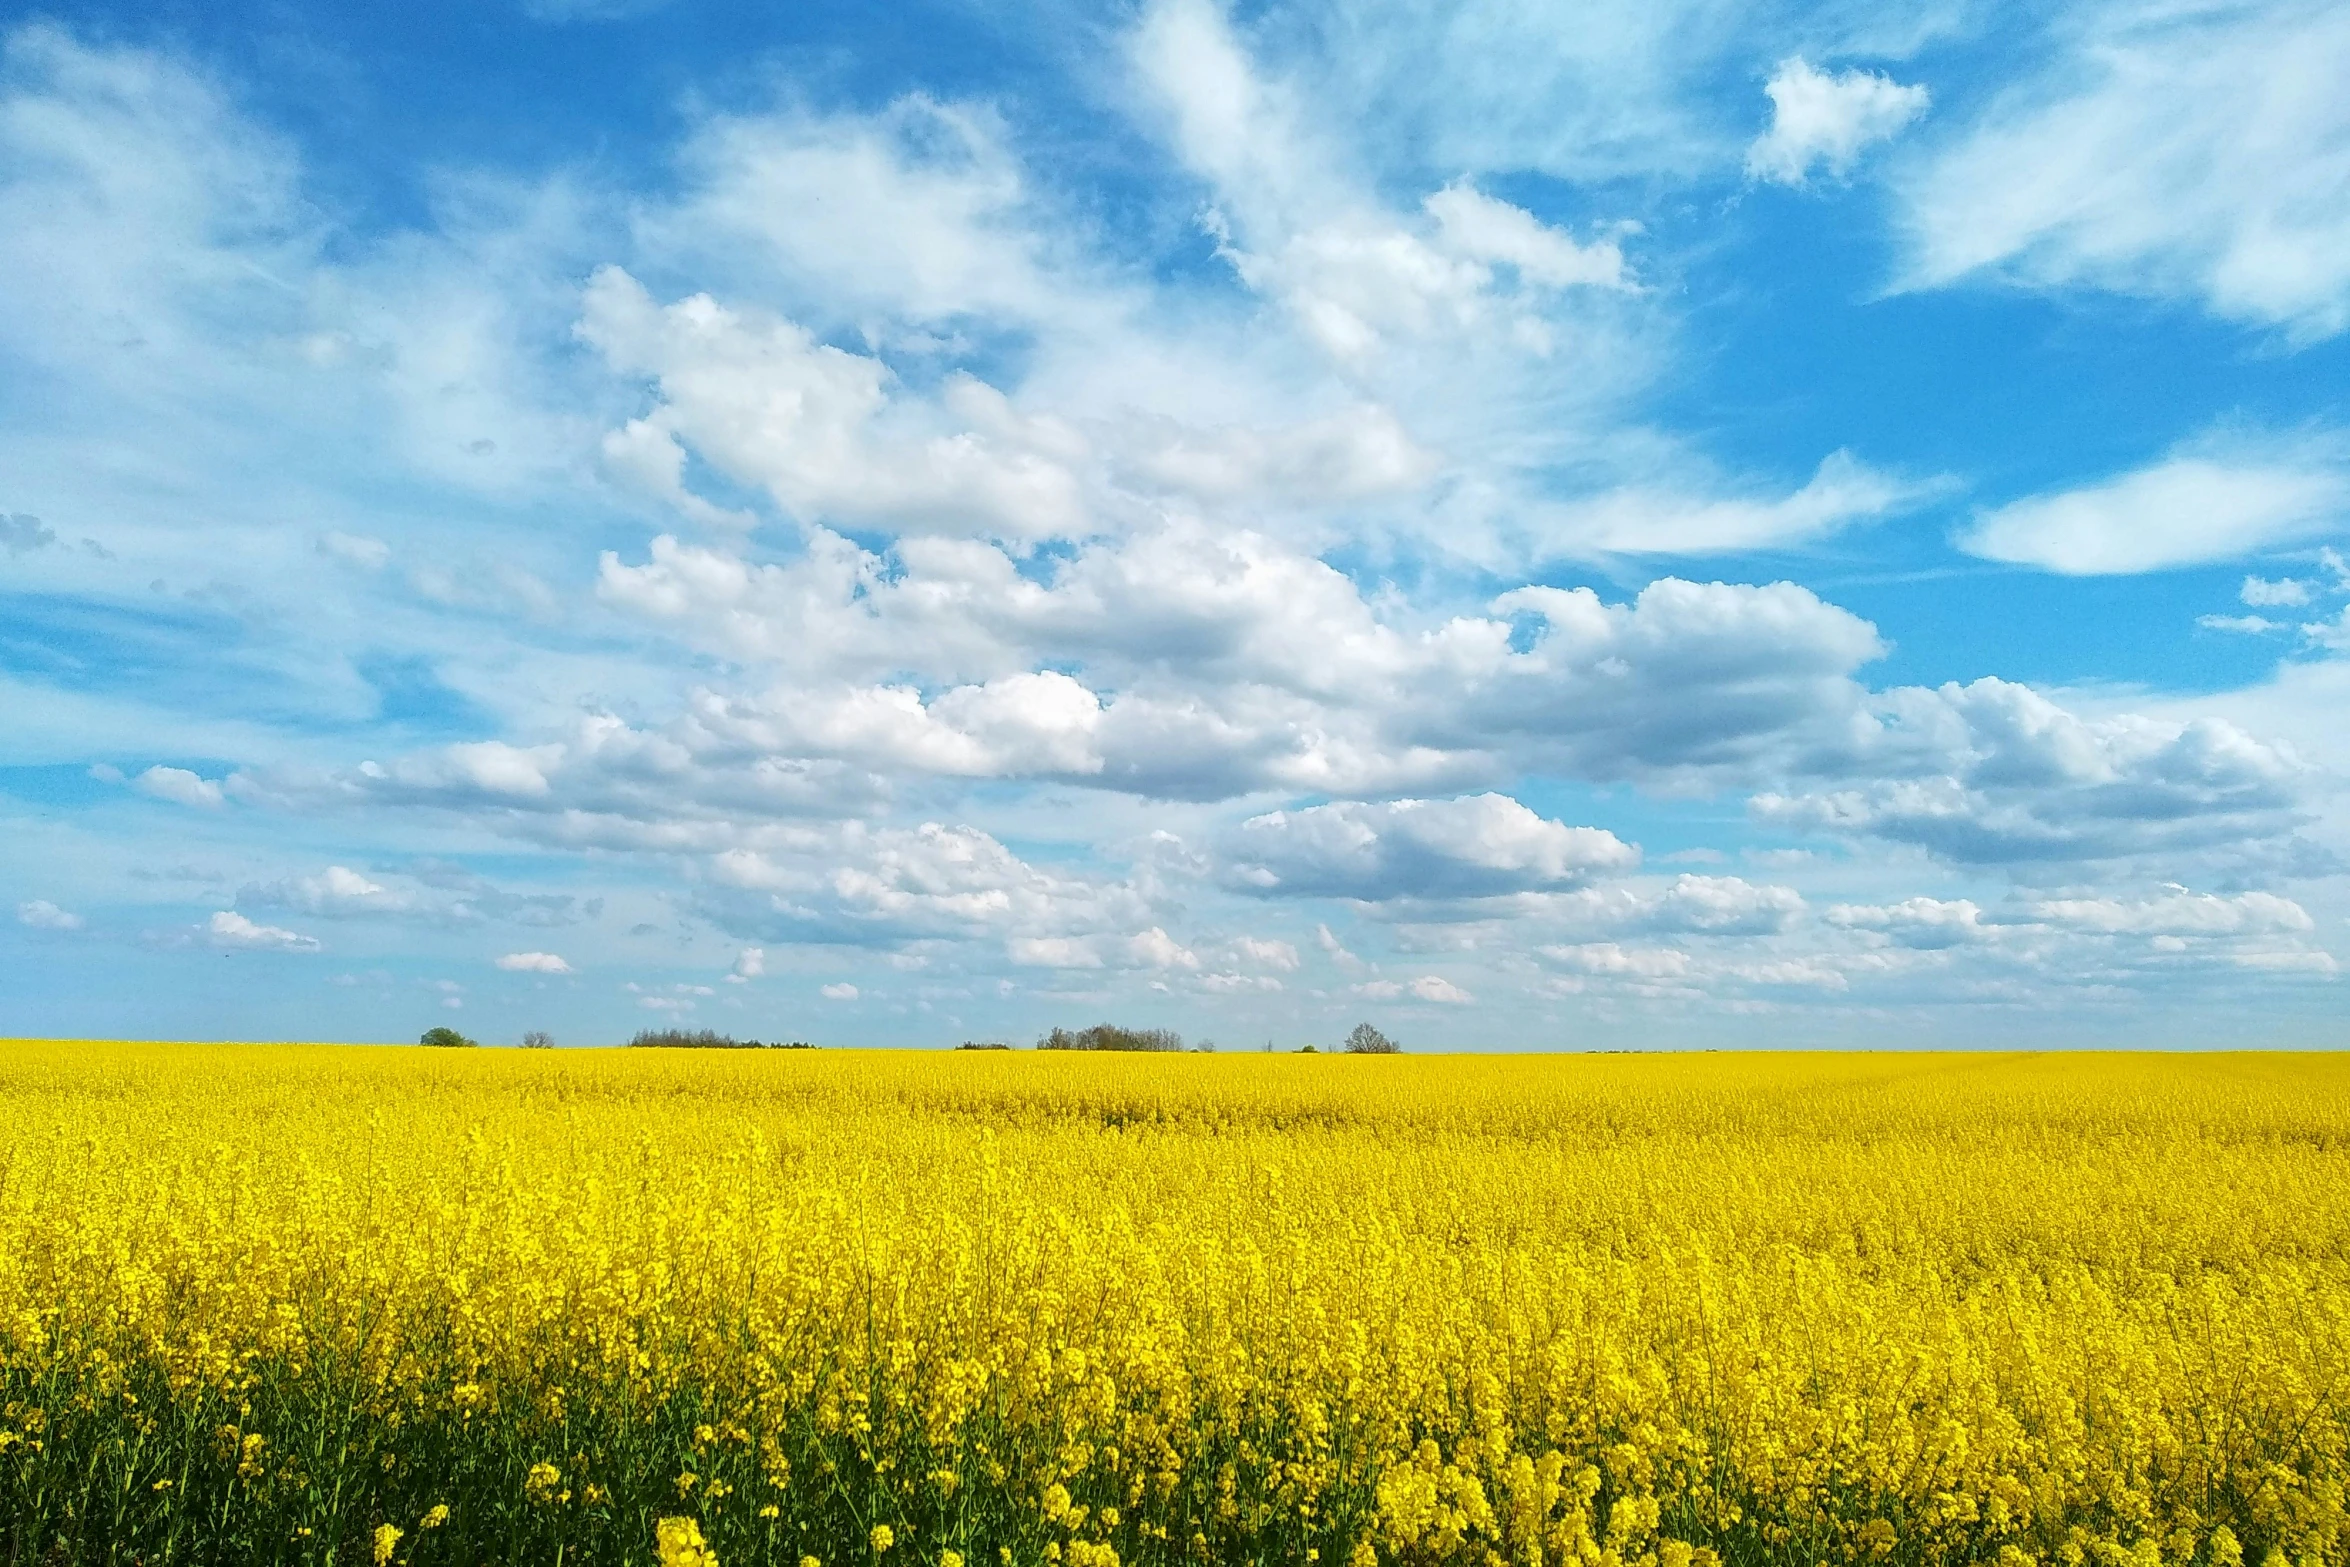 this is an image of a field that has some yellow flowers